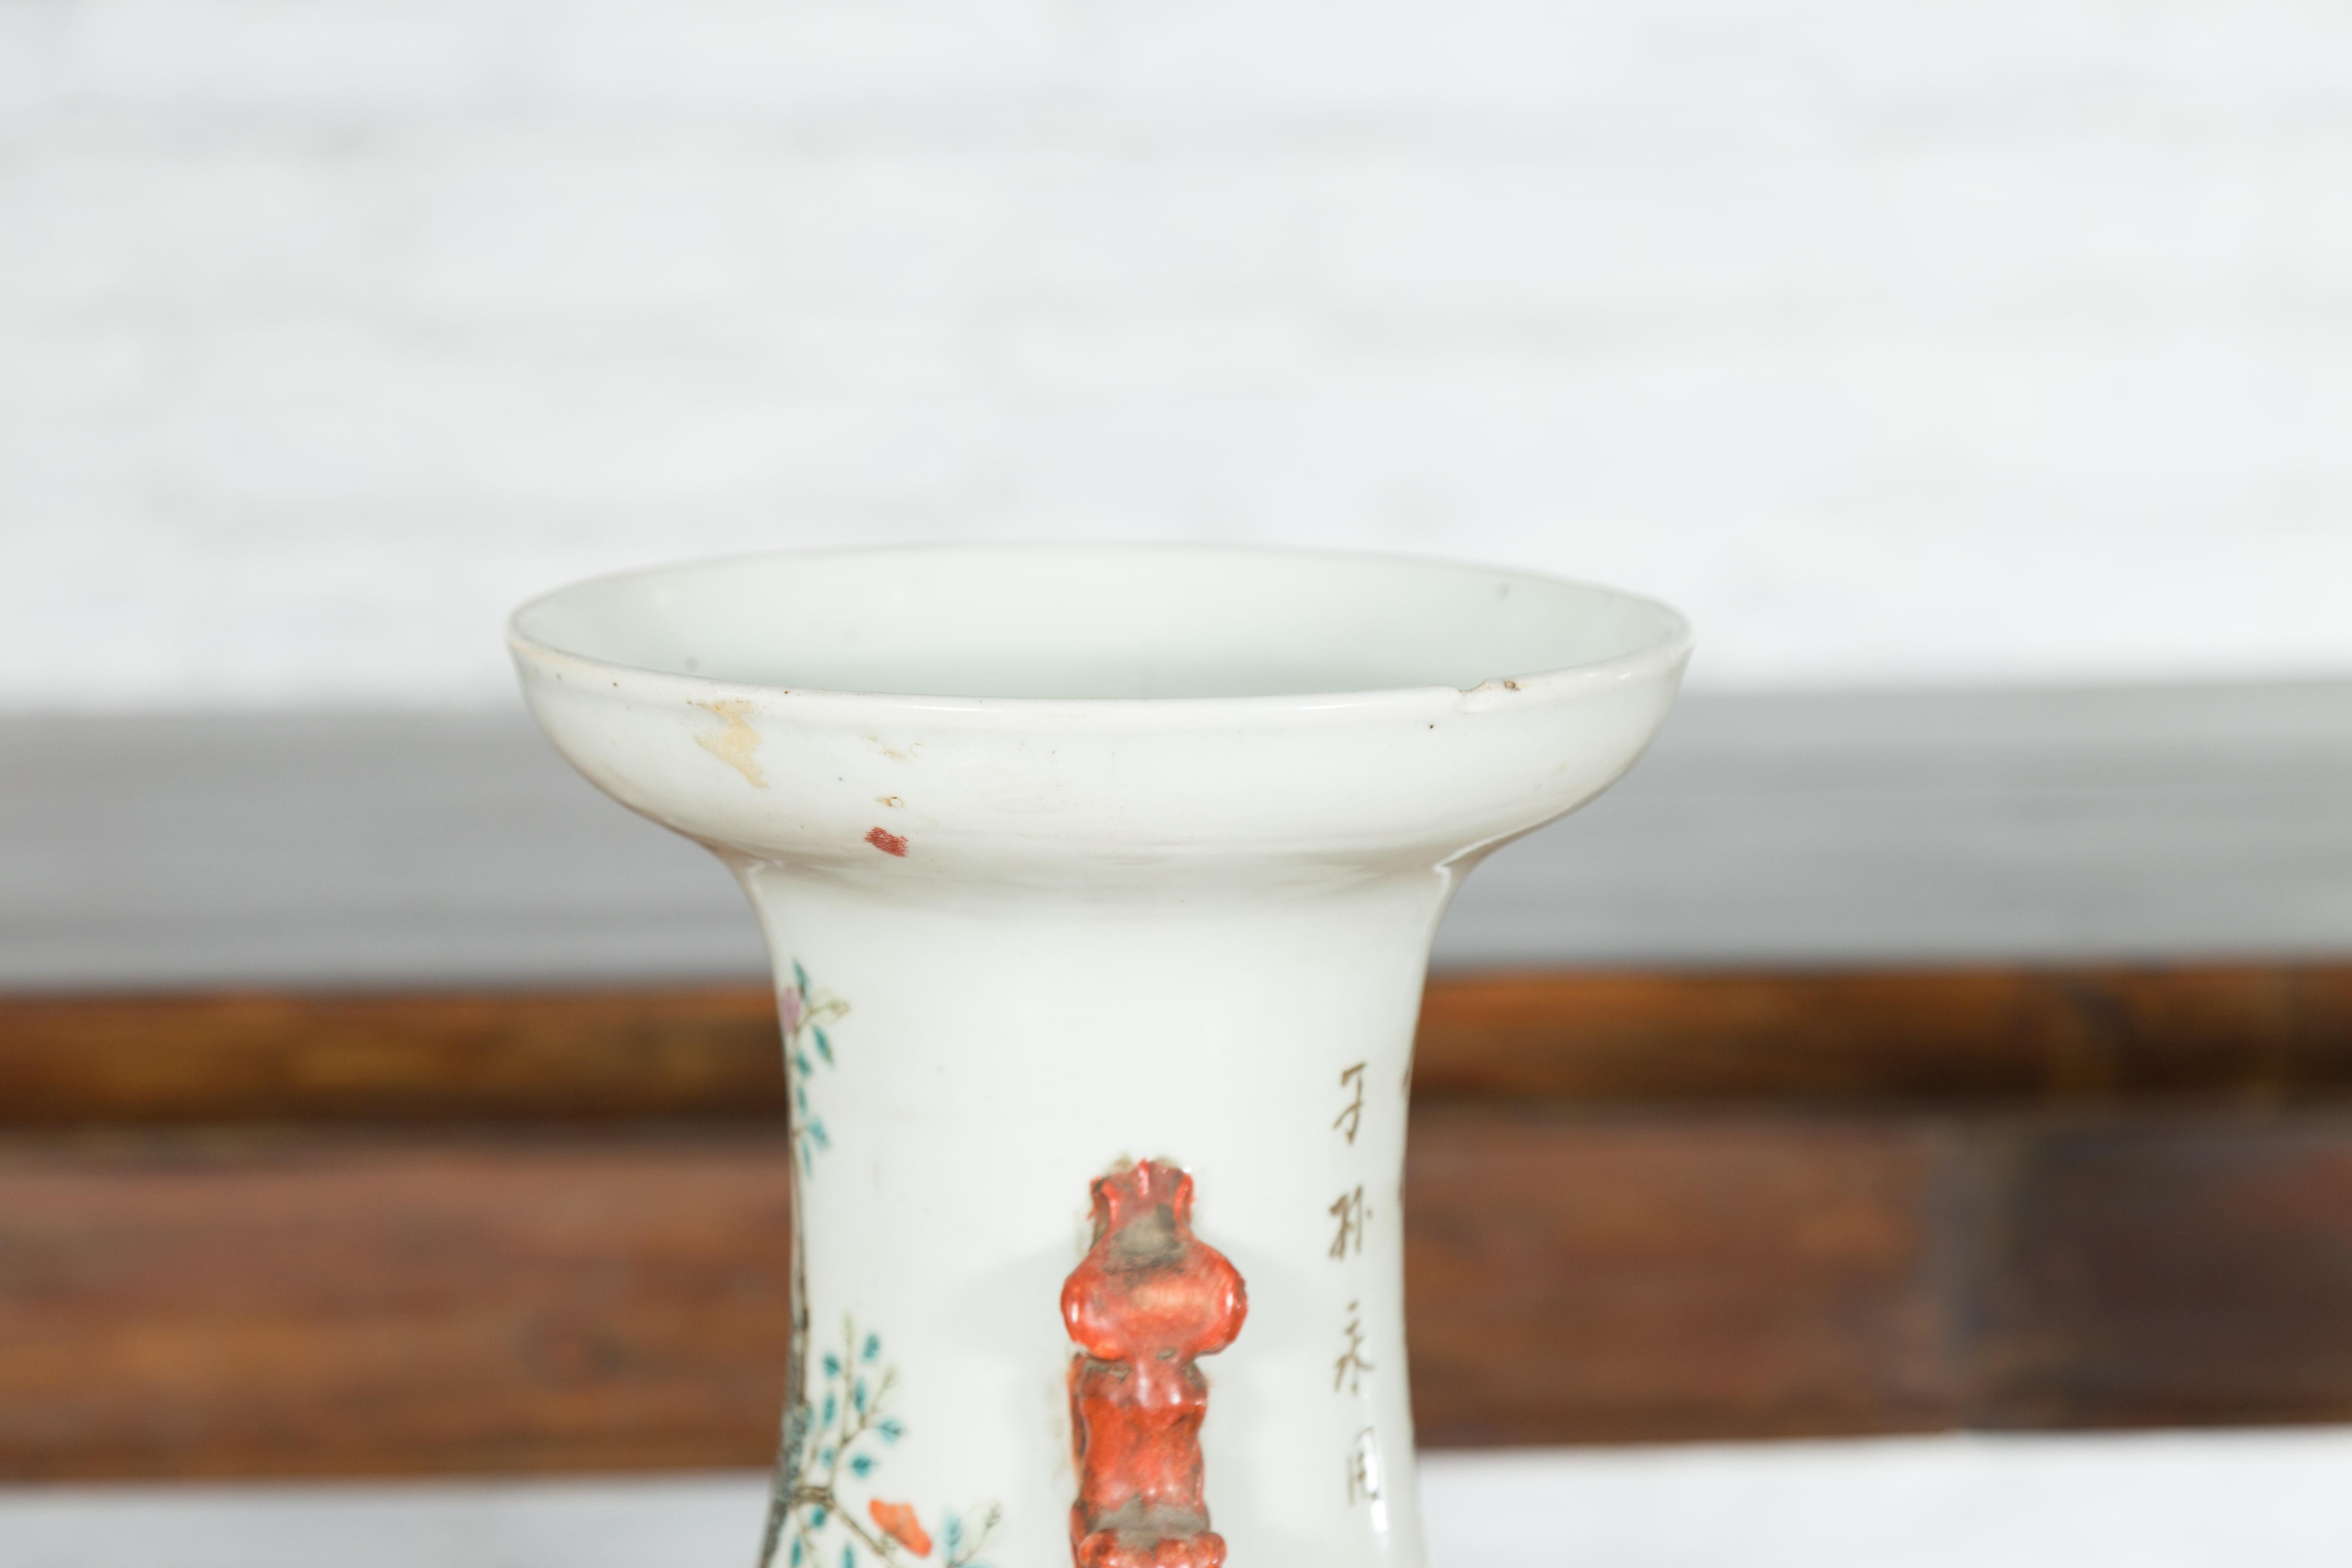 Chinese Qing Porcelain Vase with Hand-Painted Figures and Calligraphy Motifs For Sale 9